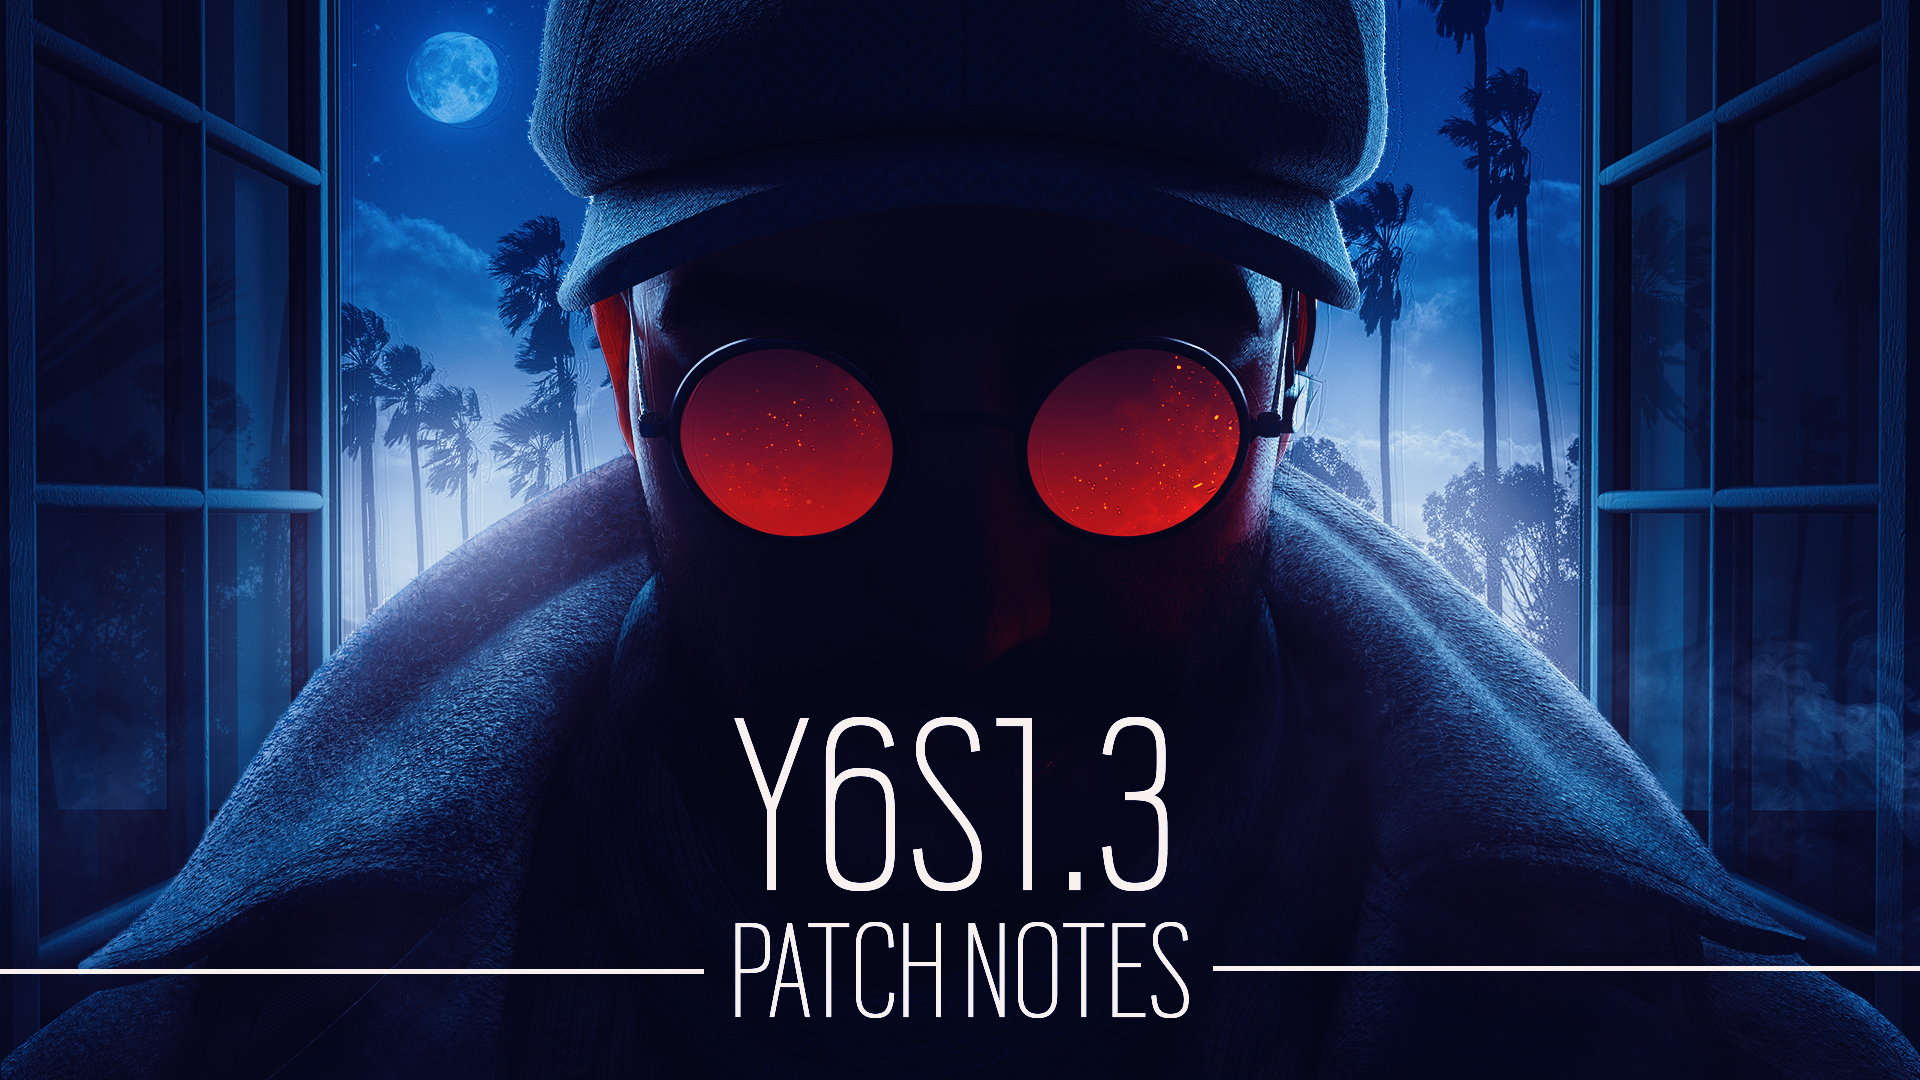 Rainbow Six Siege Y6s1 3 Patch Notes Are Now Live At The Link Below T Co Vwnmz39aou Here Are The Download Sizes For The Patch Per Platform Ubisoft Connect 986 80 Mb